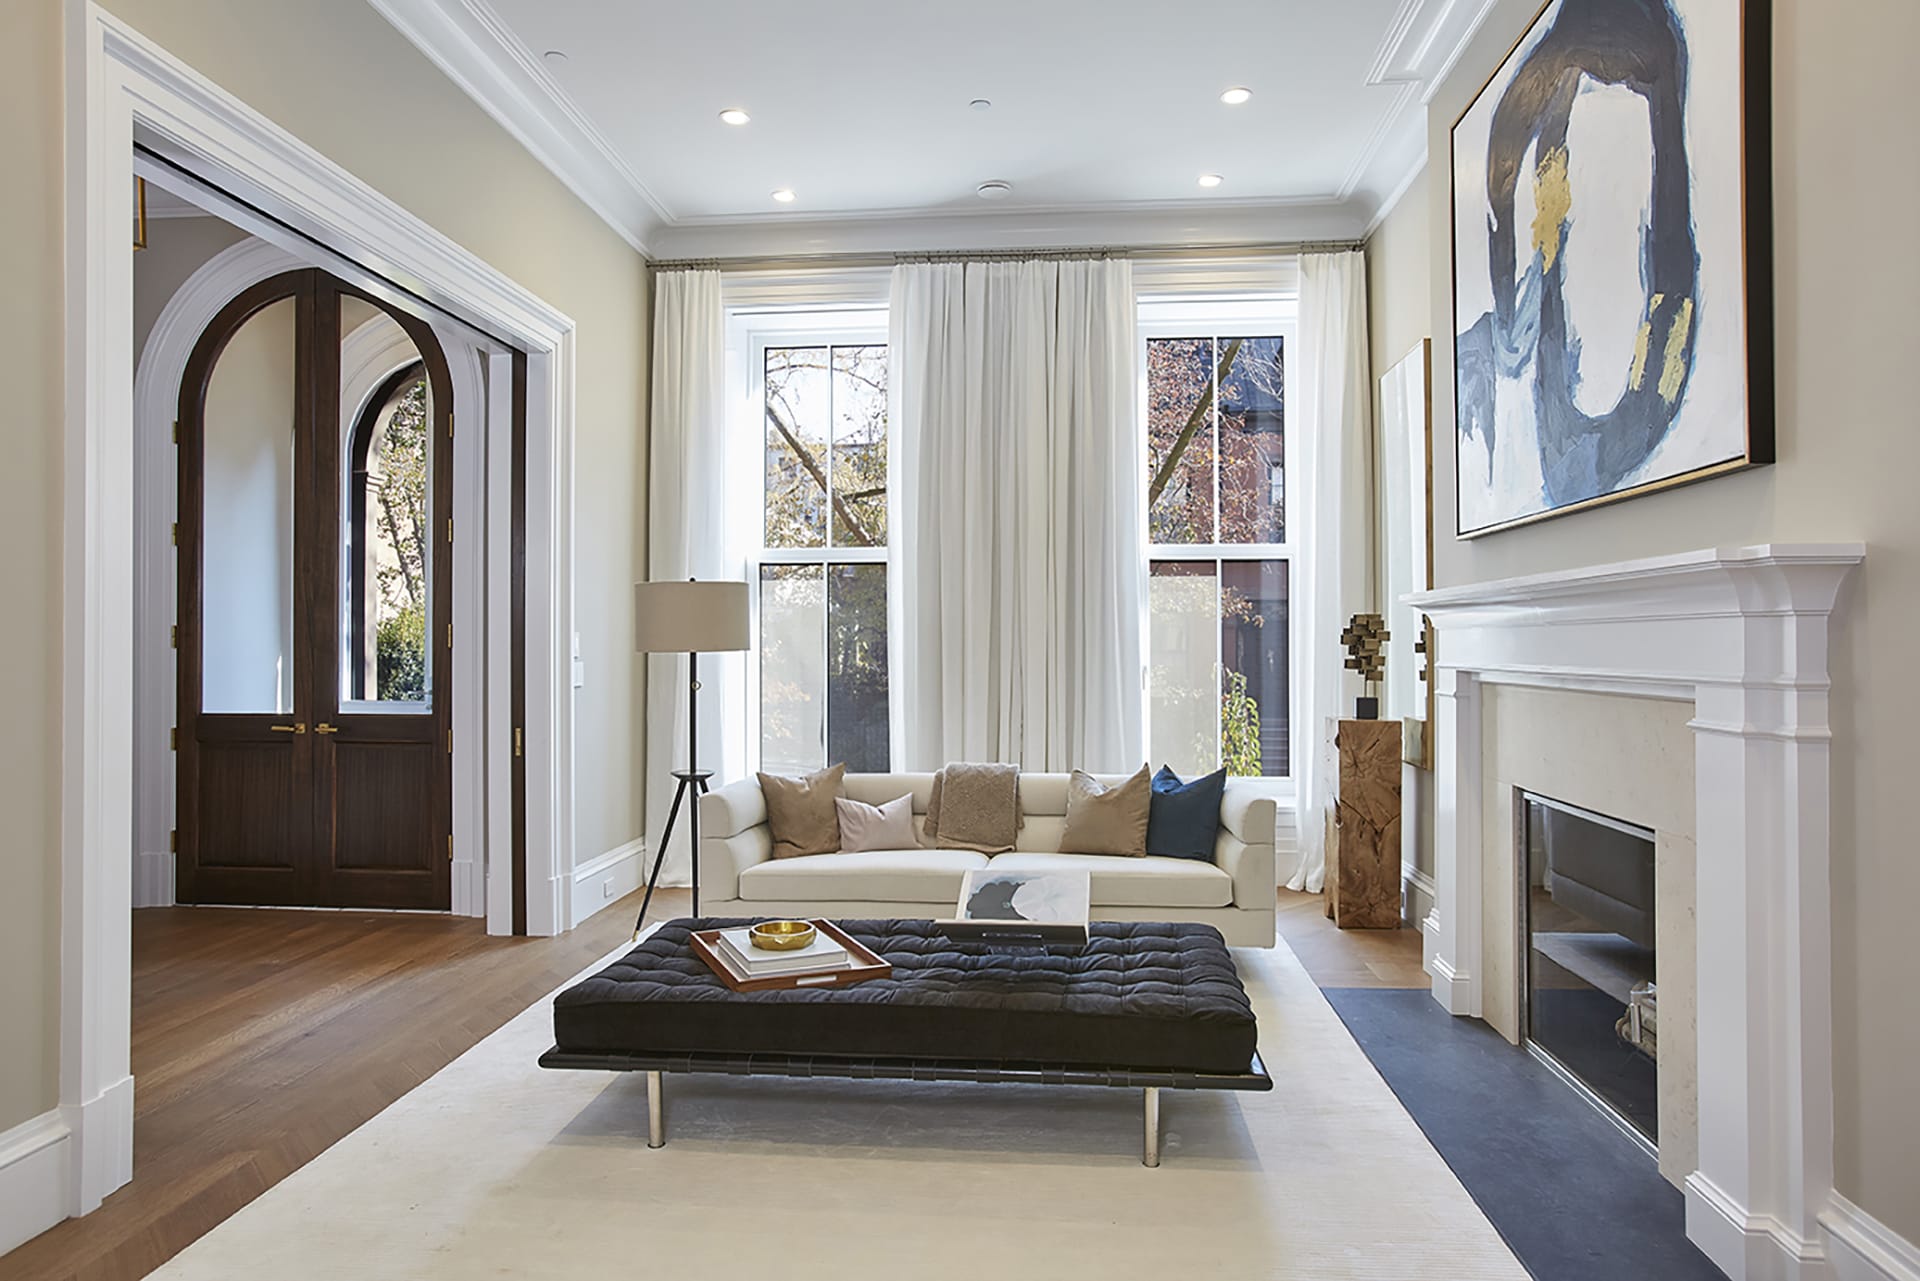 Living room and entryway of a Brooklyn Heights Passive House with arched historic doors and electric fireplace.